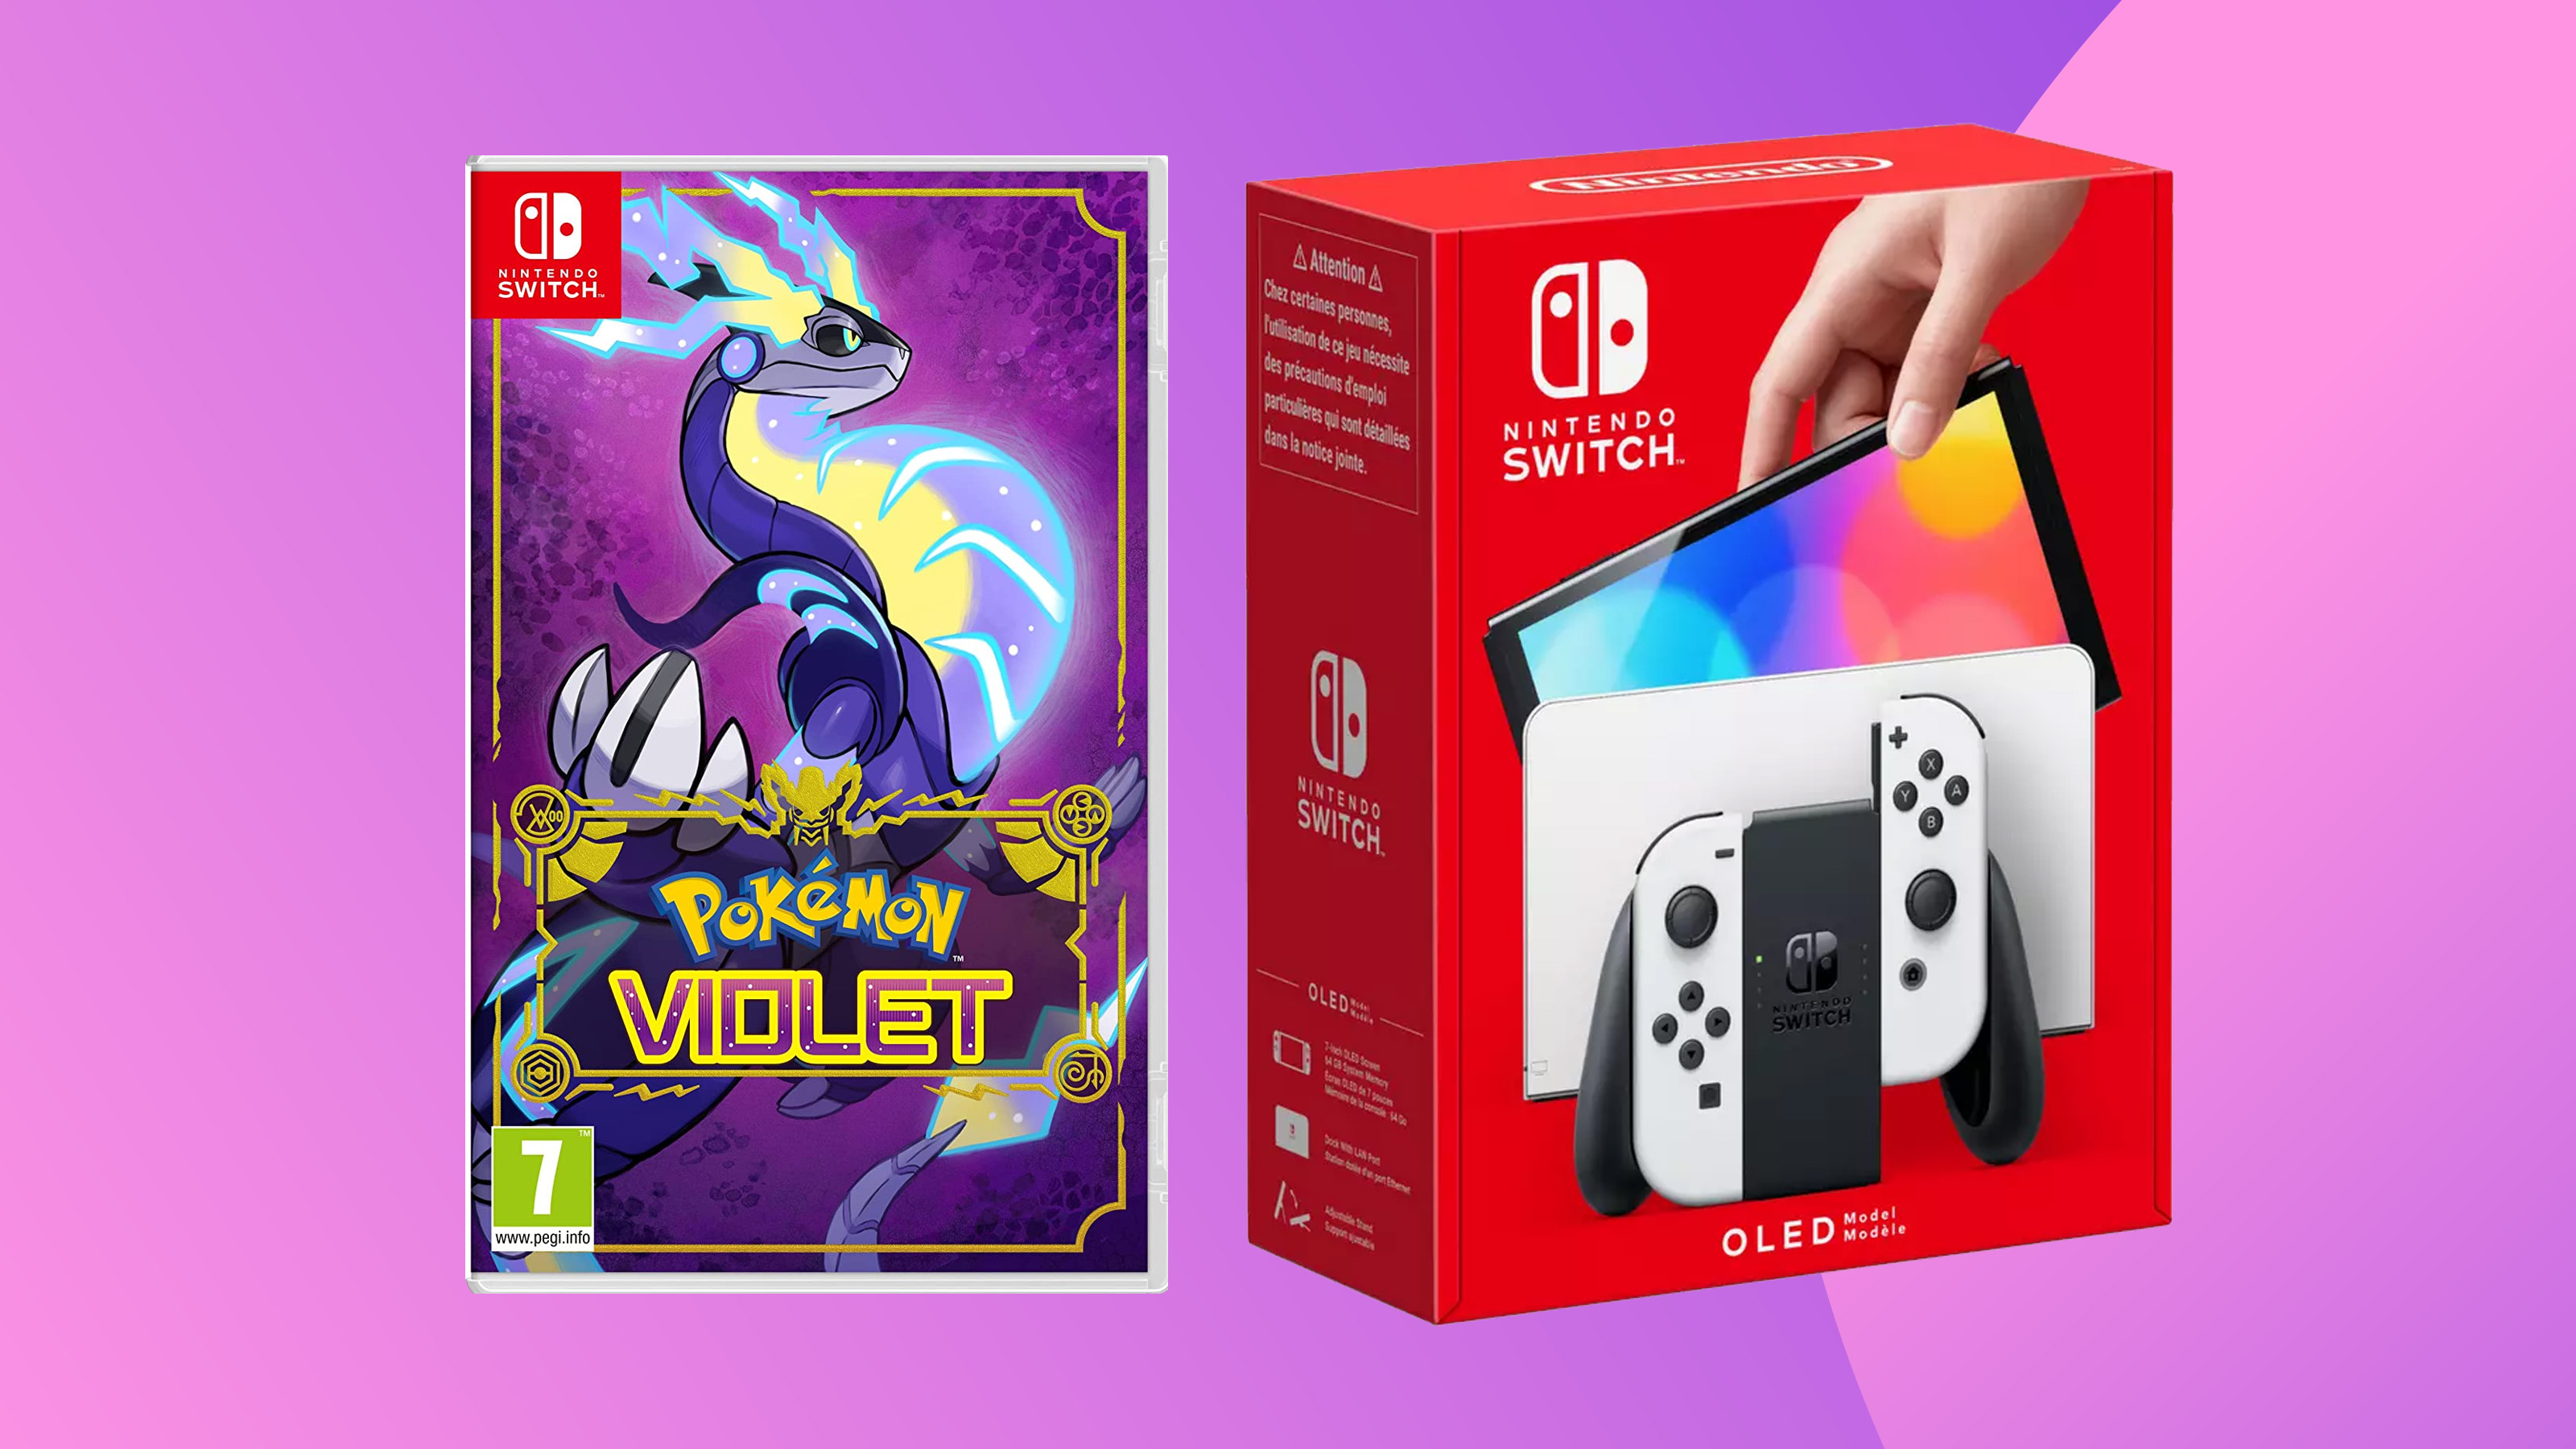 A product shot of the Switch OLED and Pokemon Violet on a colourful background